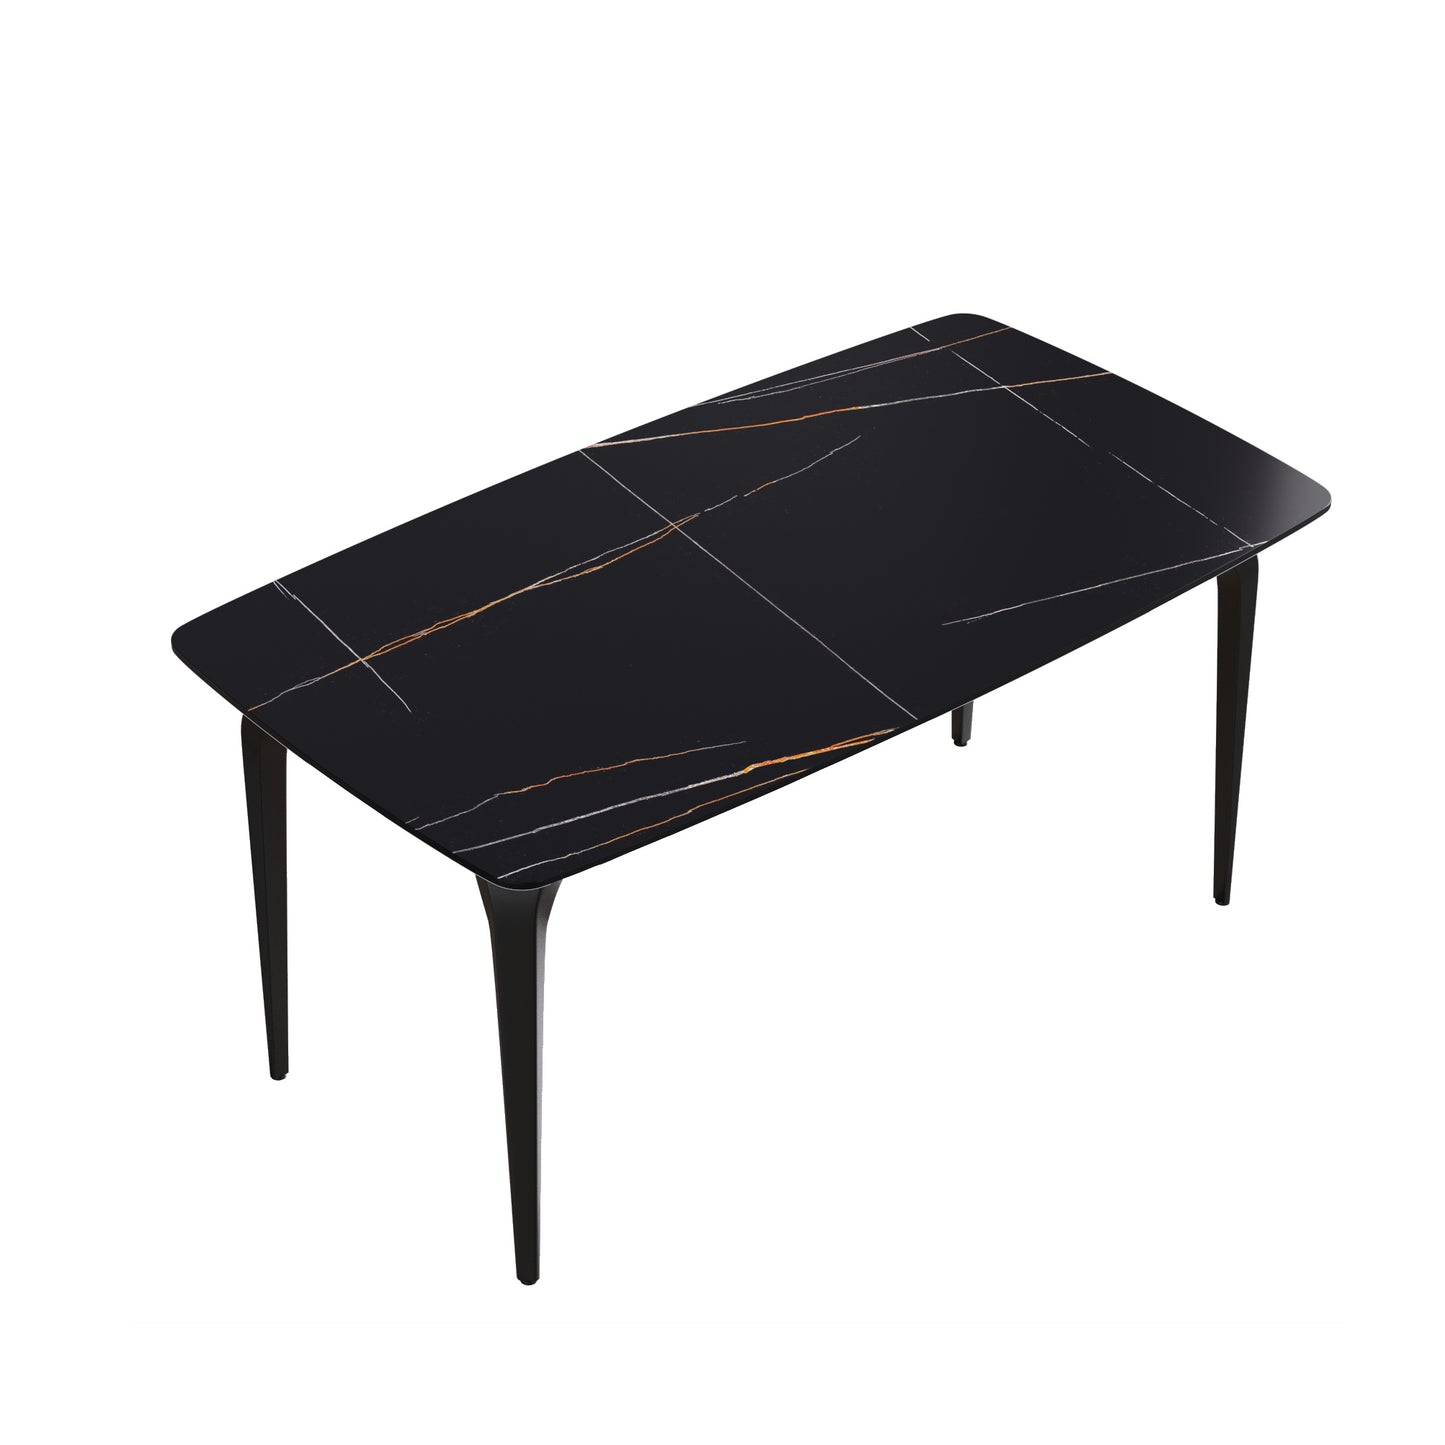 63"Modern artificial stone black curved black metal leg dining table -6 people